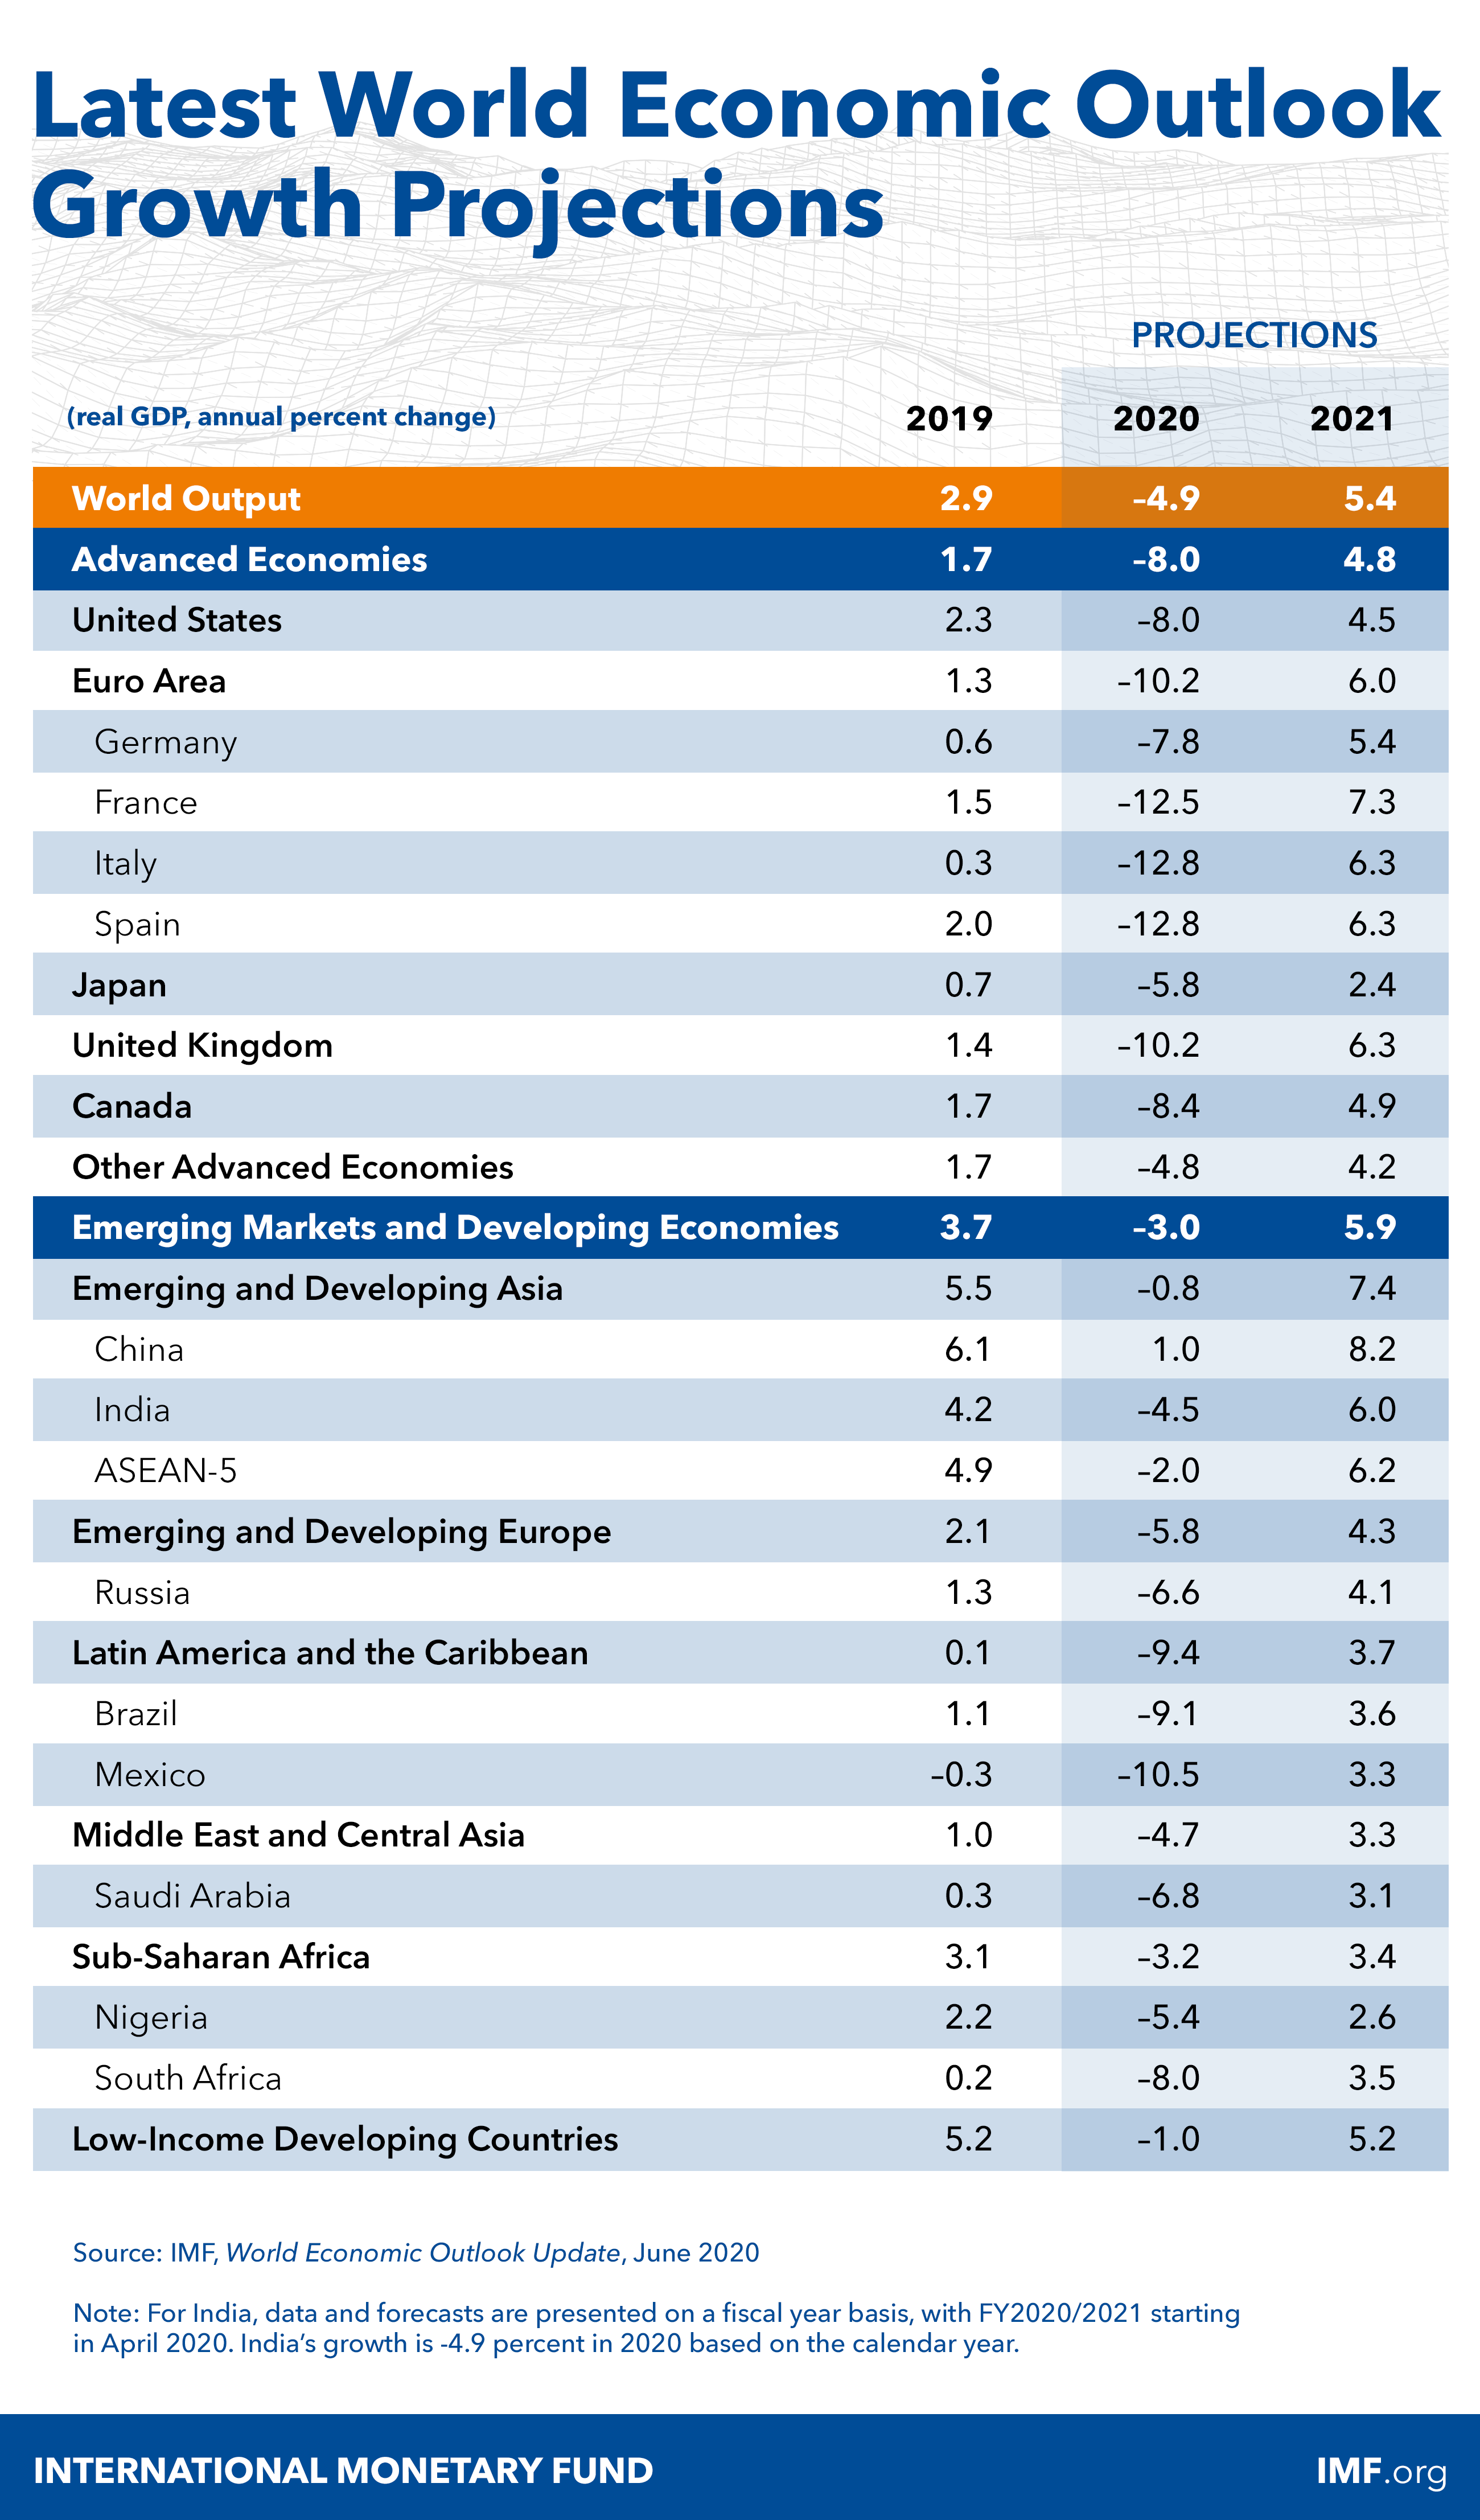 World Economic Outlook, June 2020, Growth Projections table